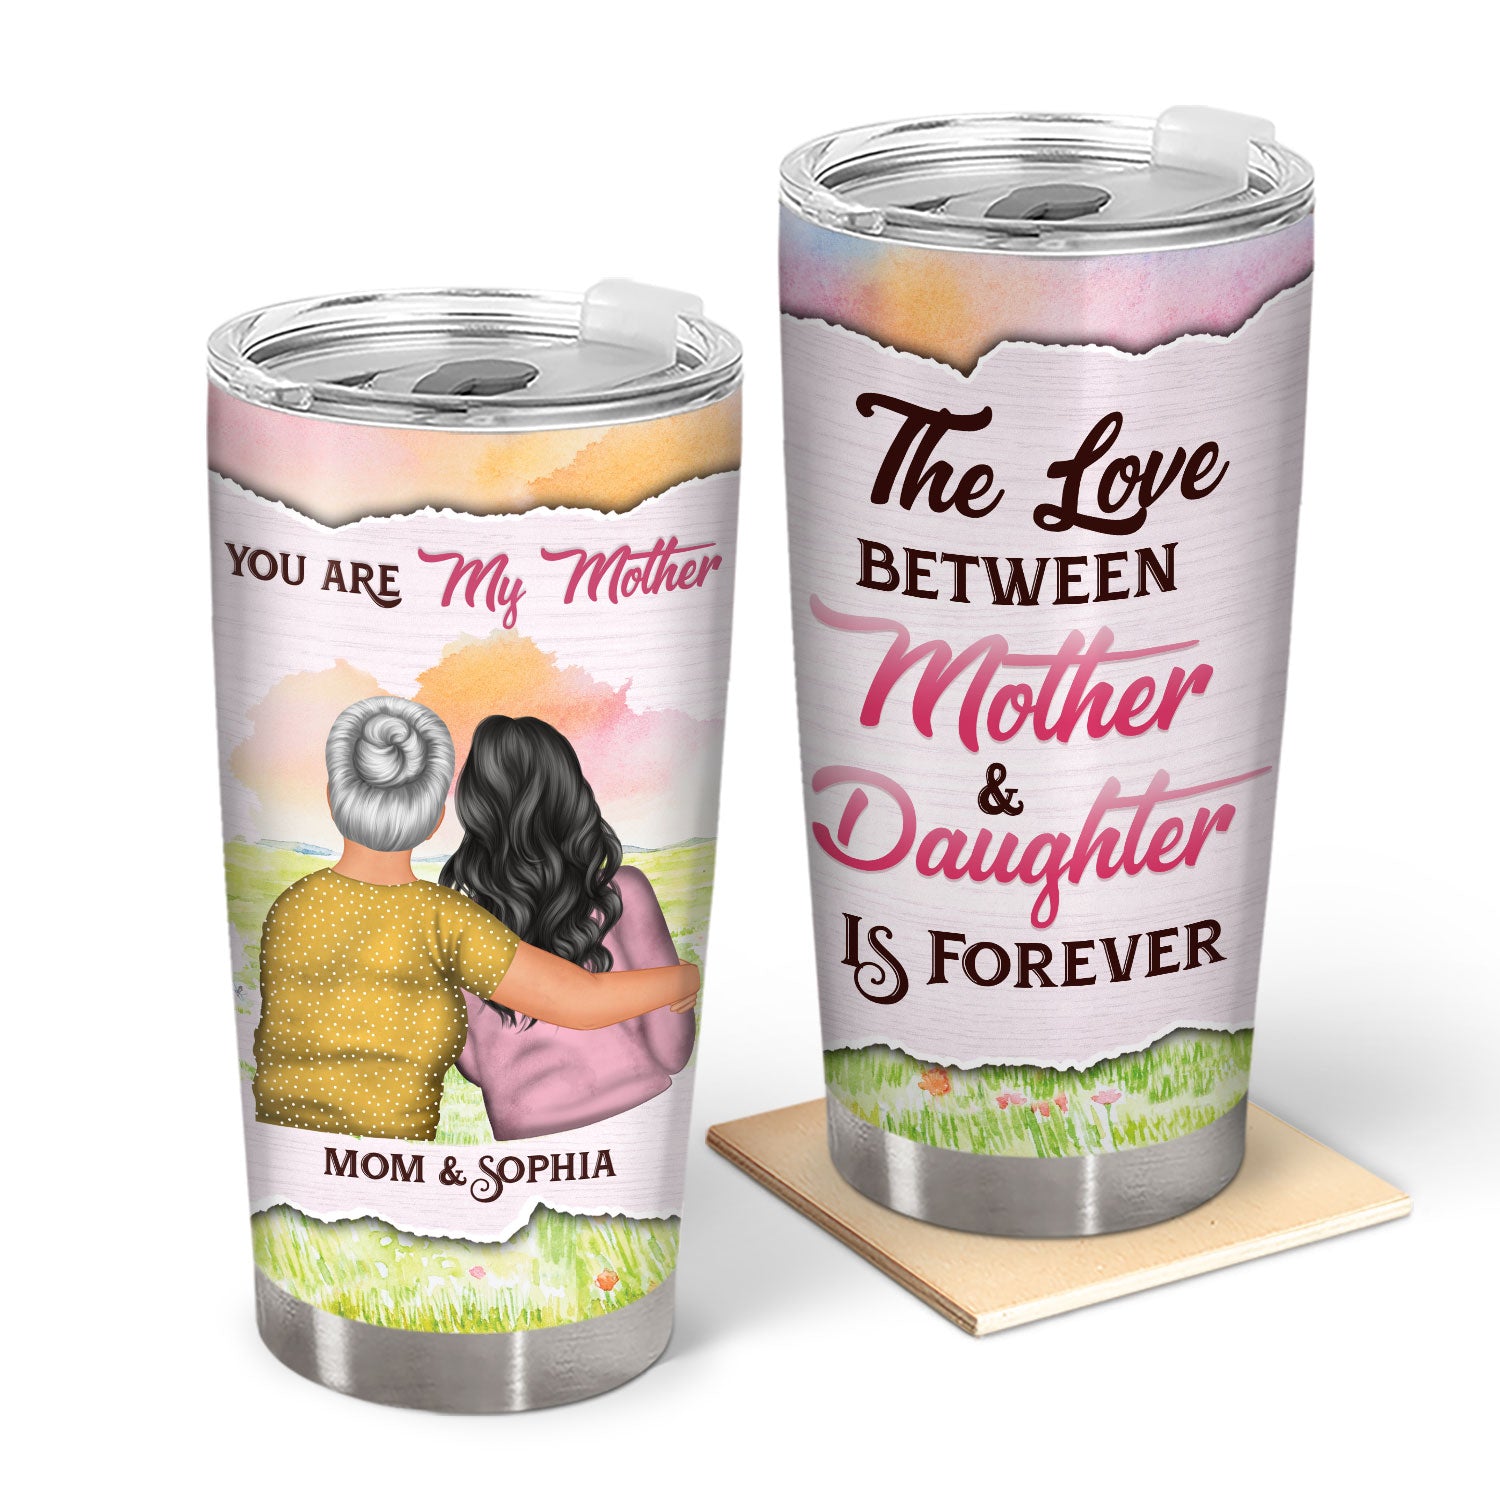 The Love Between Mother And Daughter Is Forever - Family, Birthday Gift For Grandma, Mom, Wife, Daughters - Personalized Custom Tumbler